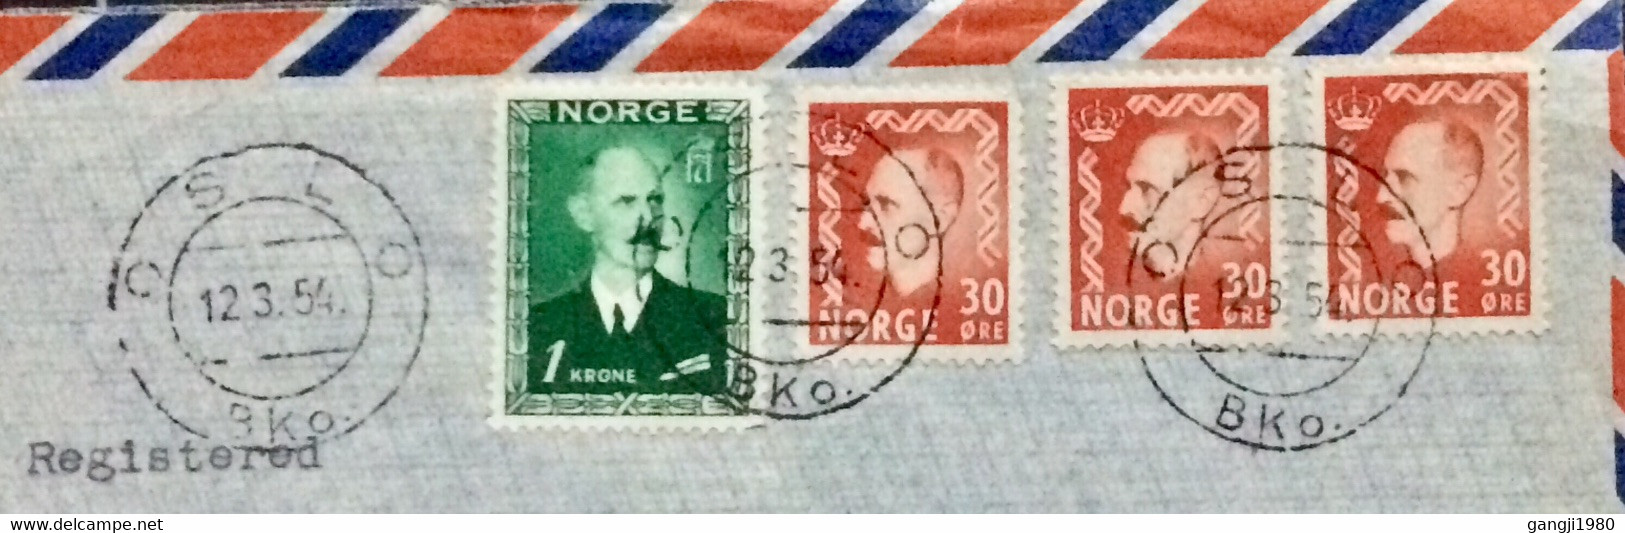 NORWAY 1954, PRIVATE COVER “EIDE” FIRM, USED TO USA,KING HARKON 4 STAMPS, REGISTER OSLO & DETROIT CITY CANCEL. - Lettres & Documents